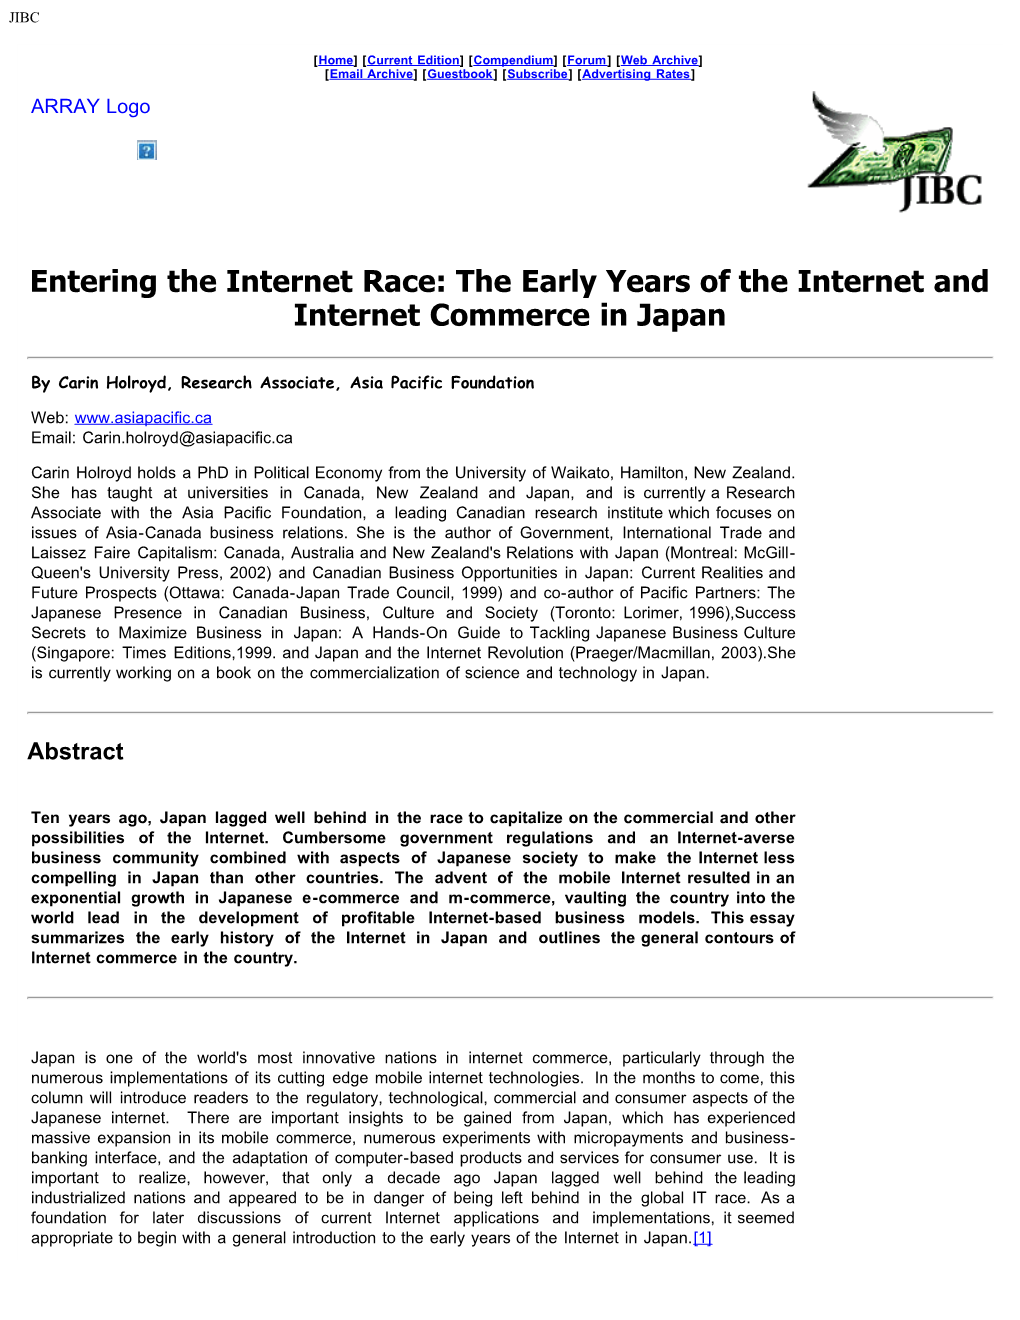 The Early Years of the Internet and Internet Commerce in Japan